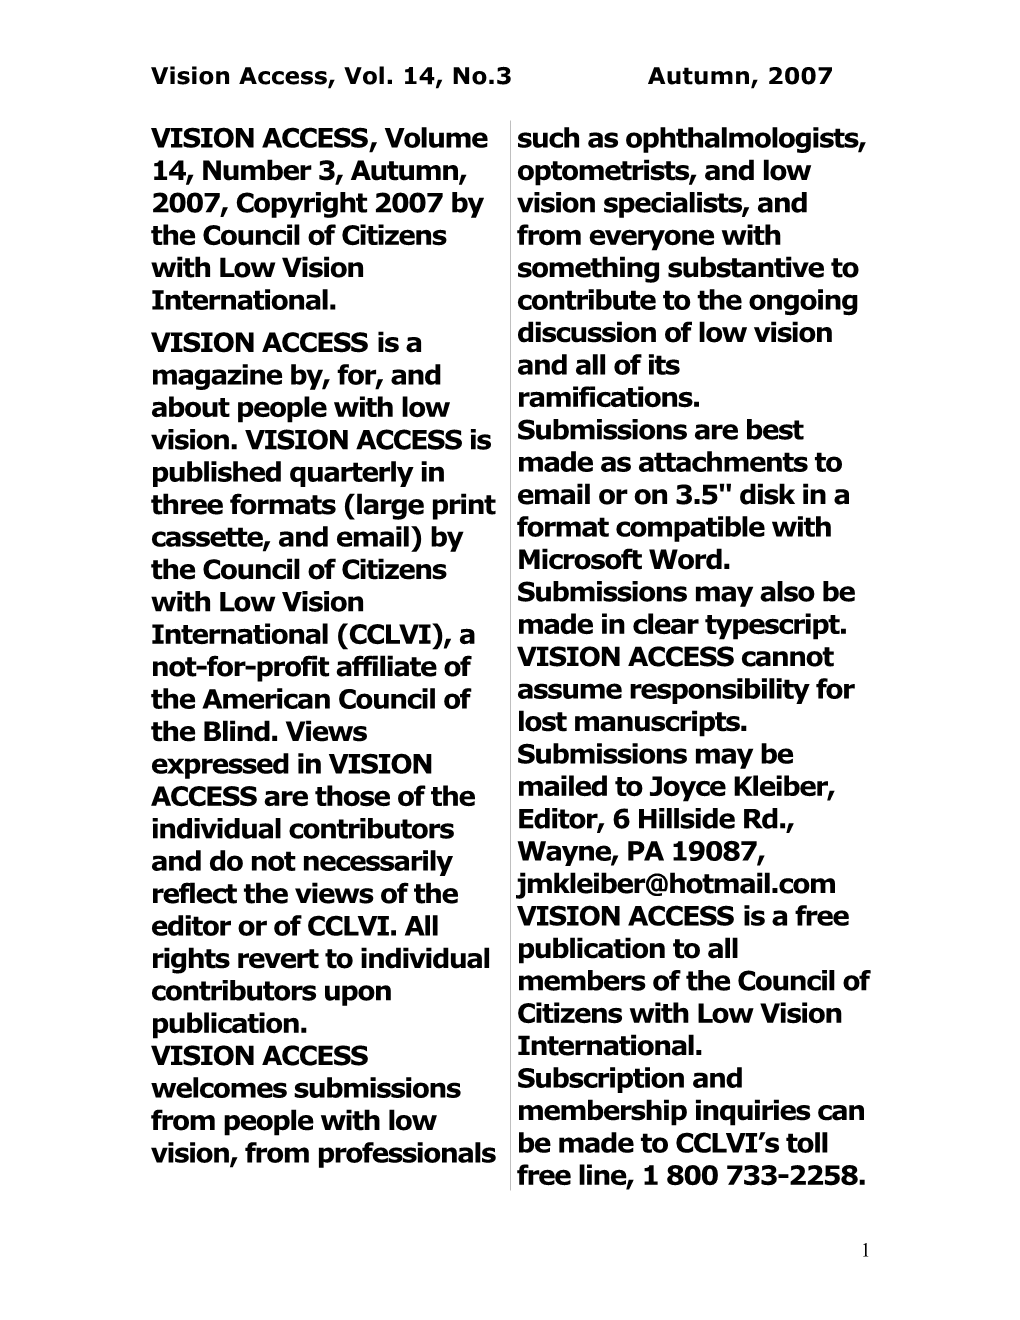 VISION ACCESS, Volume 14, Number 3, Autumn, 2007, Copyright 2007 by the Council of Citizens